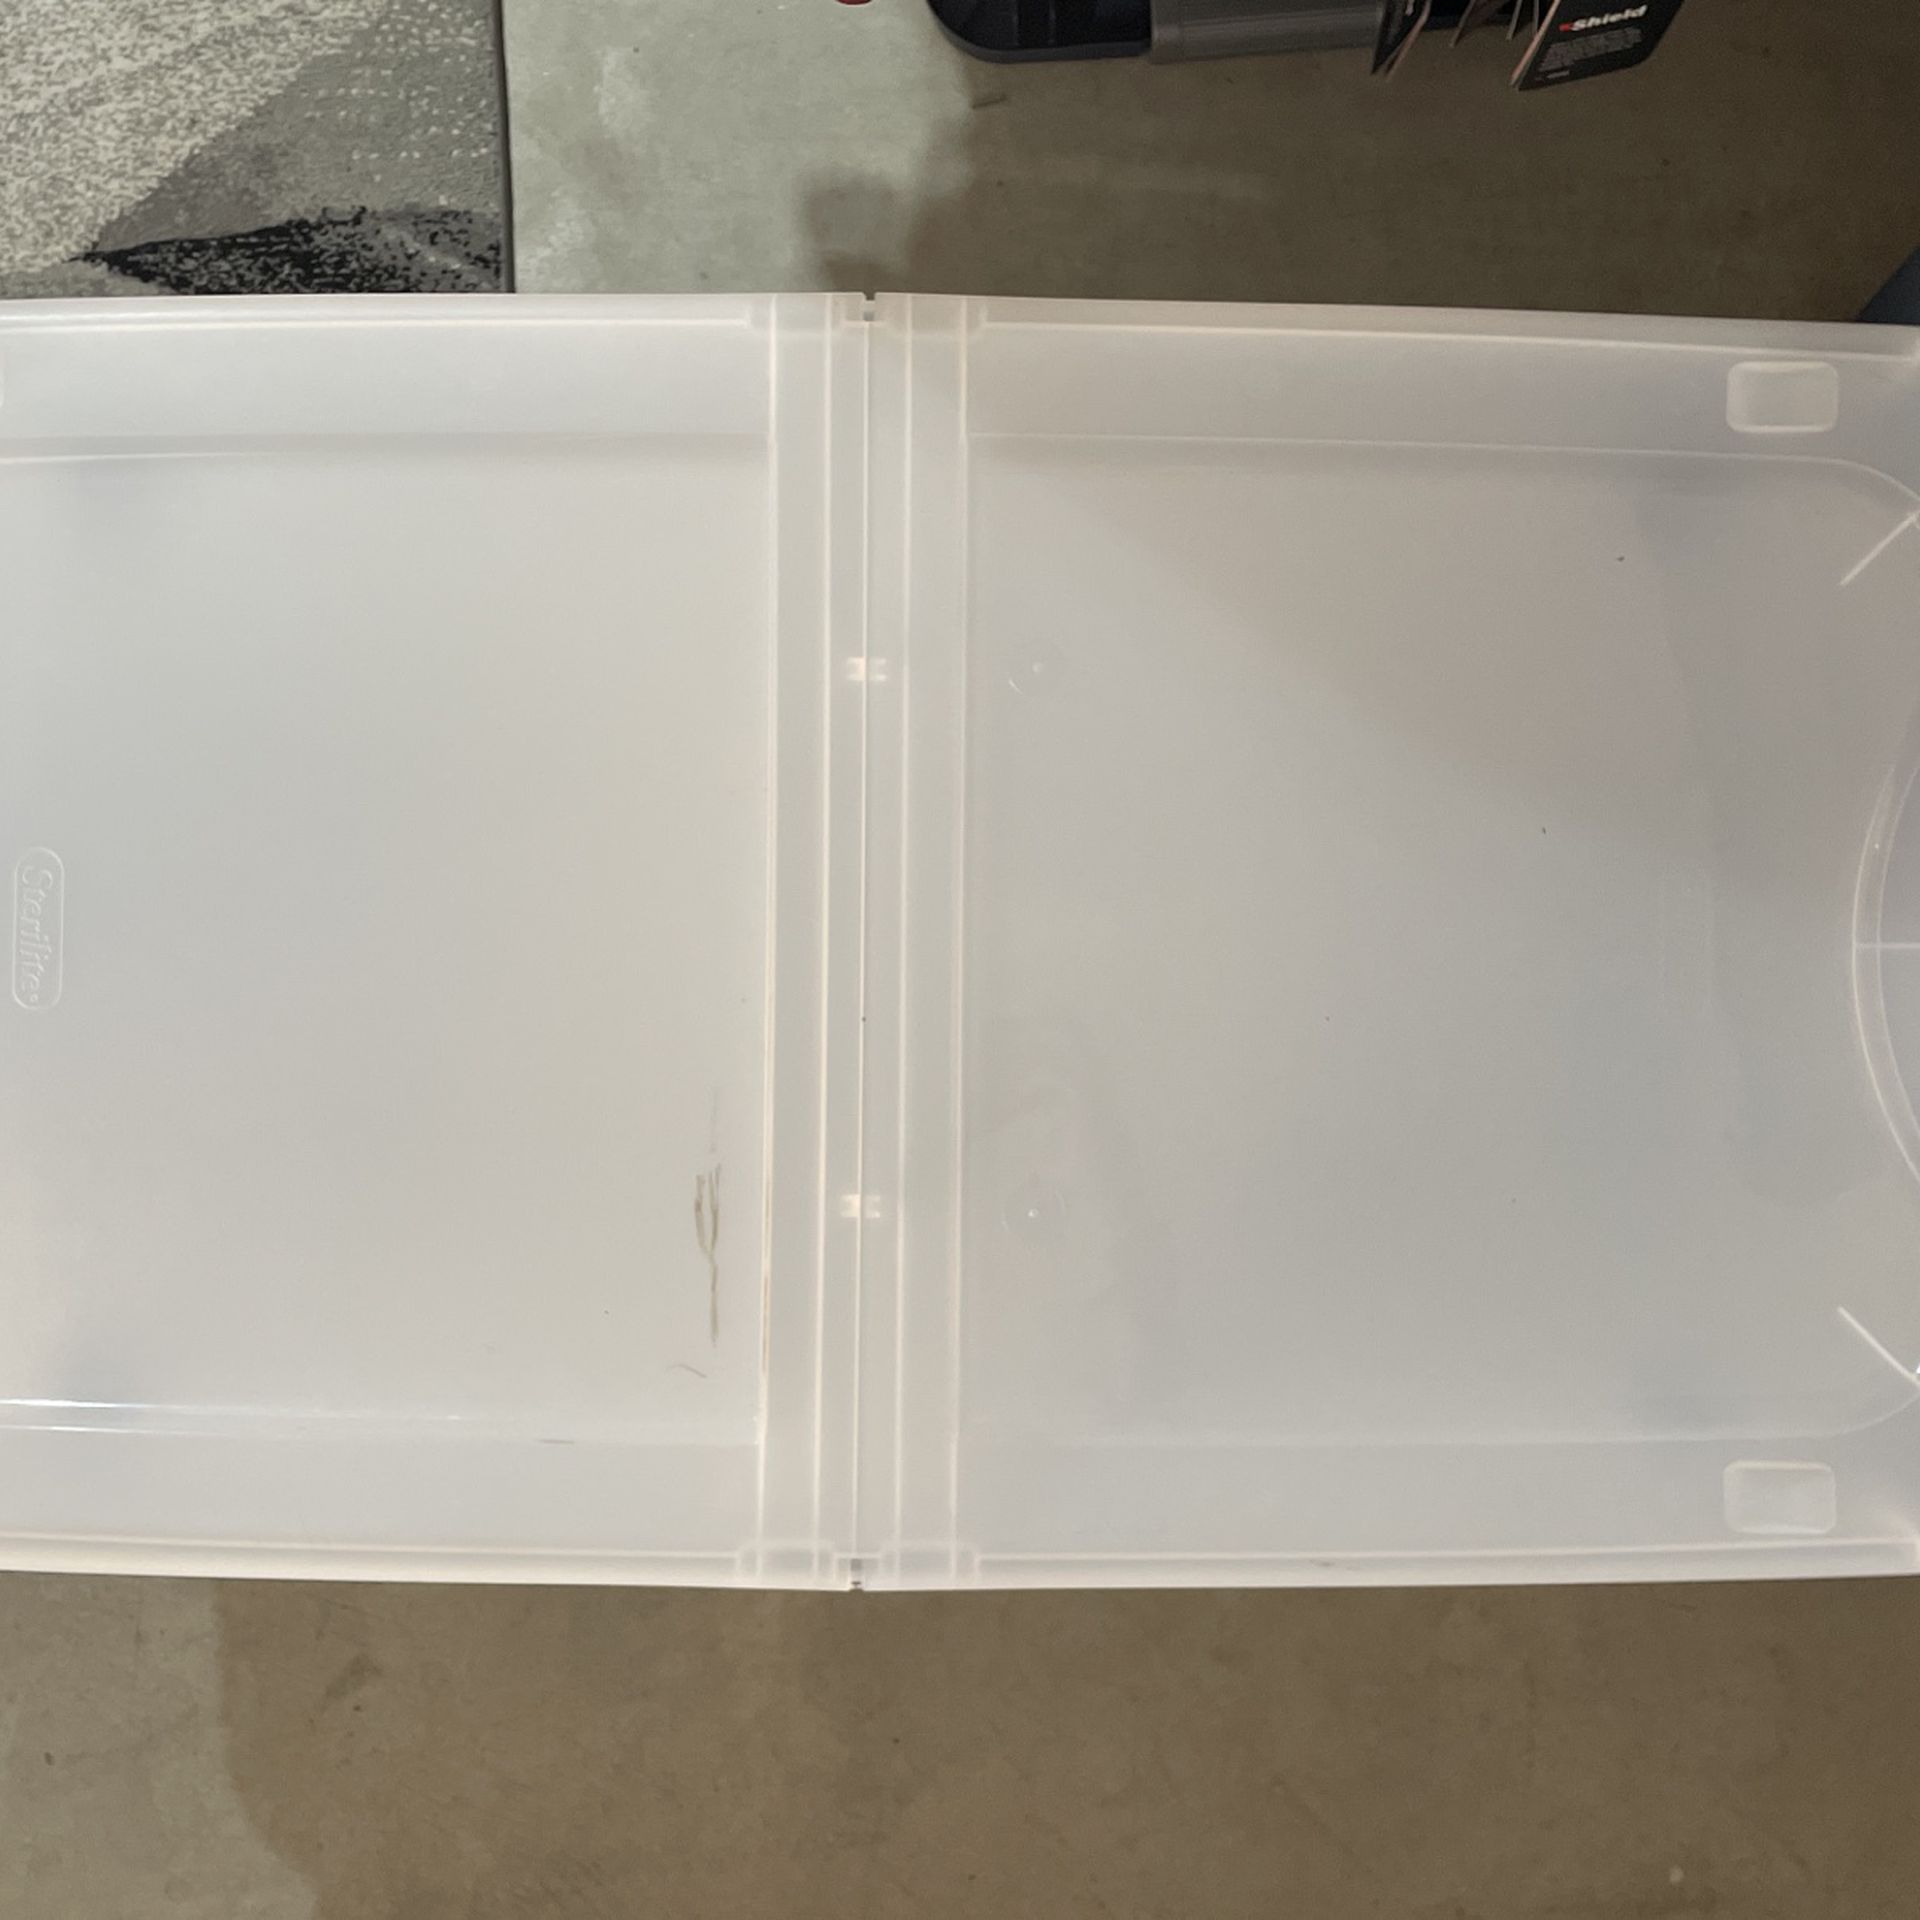 Sterilite 66 Qt. Clear View White lid tote for Sale in Katy, TX - OfferUp